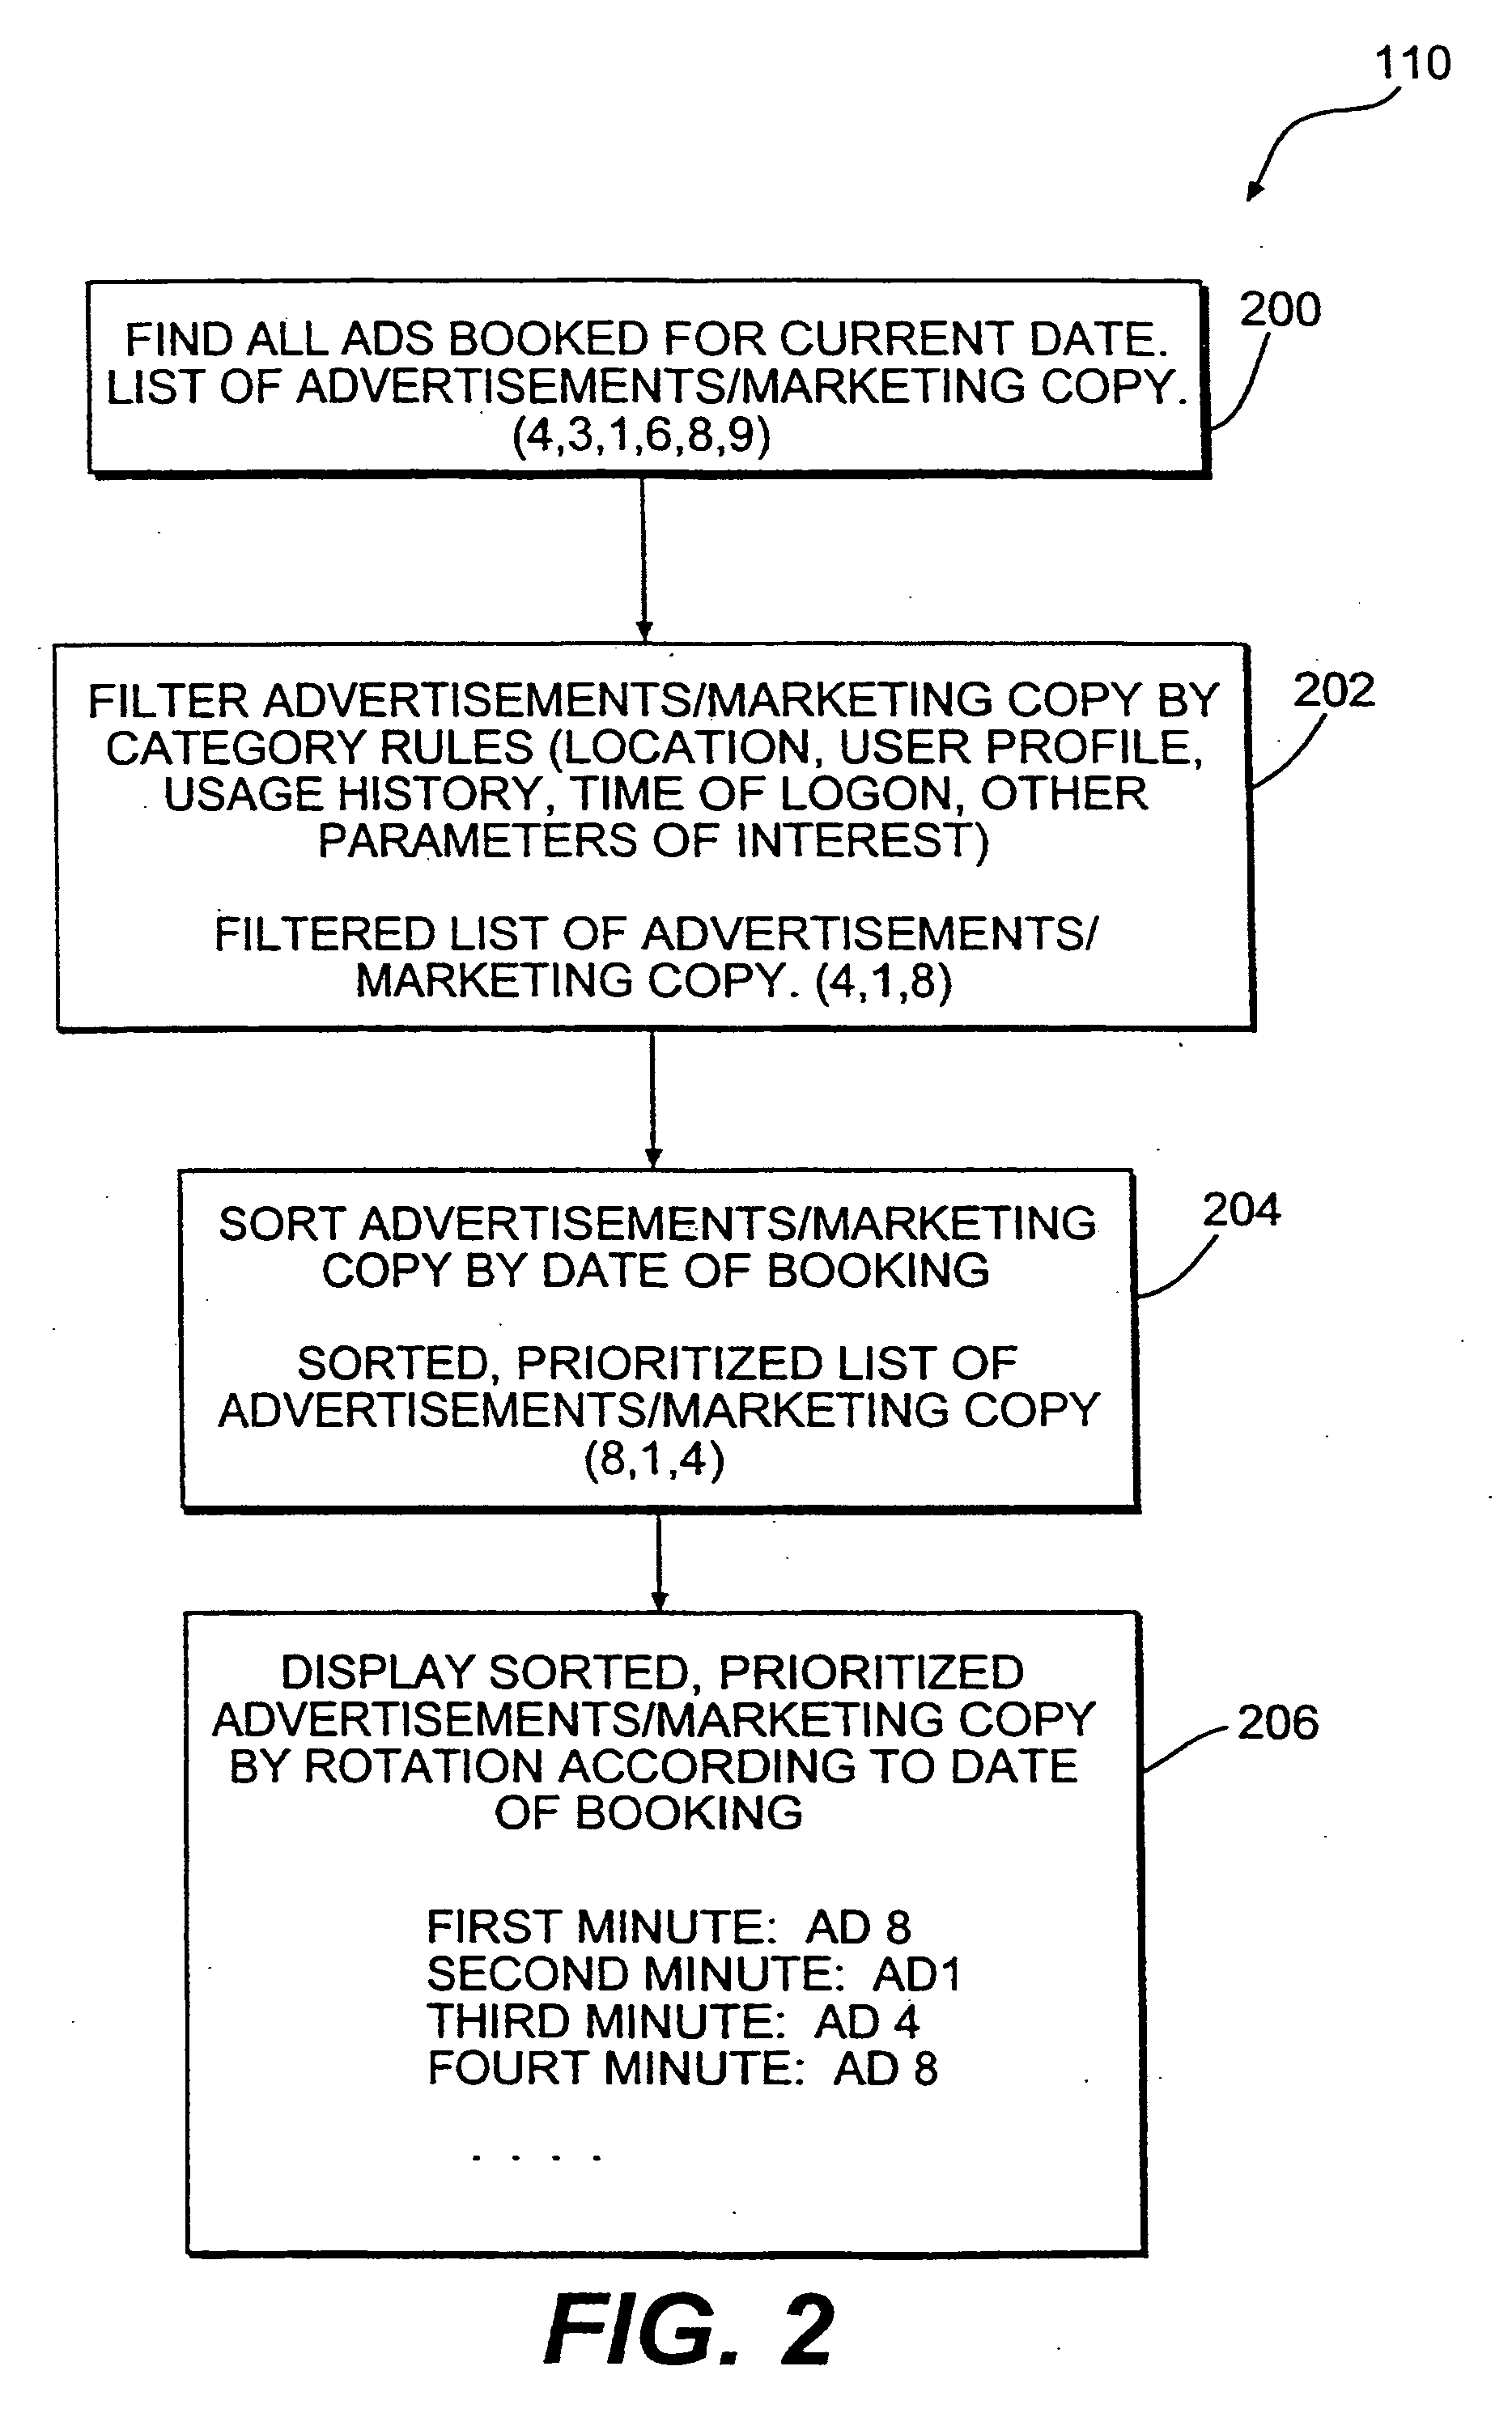 Method and system for providing personalized online services and advertisements in public spaces